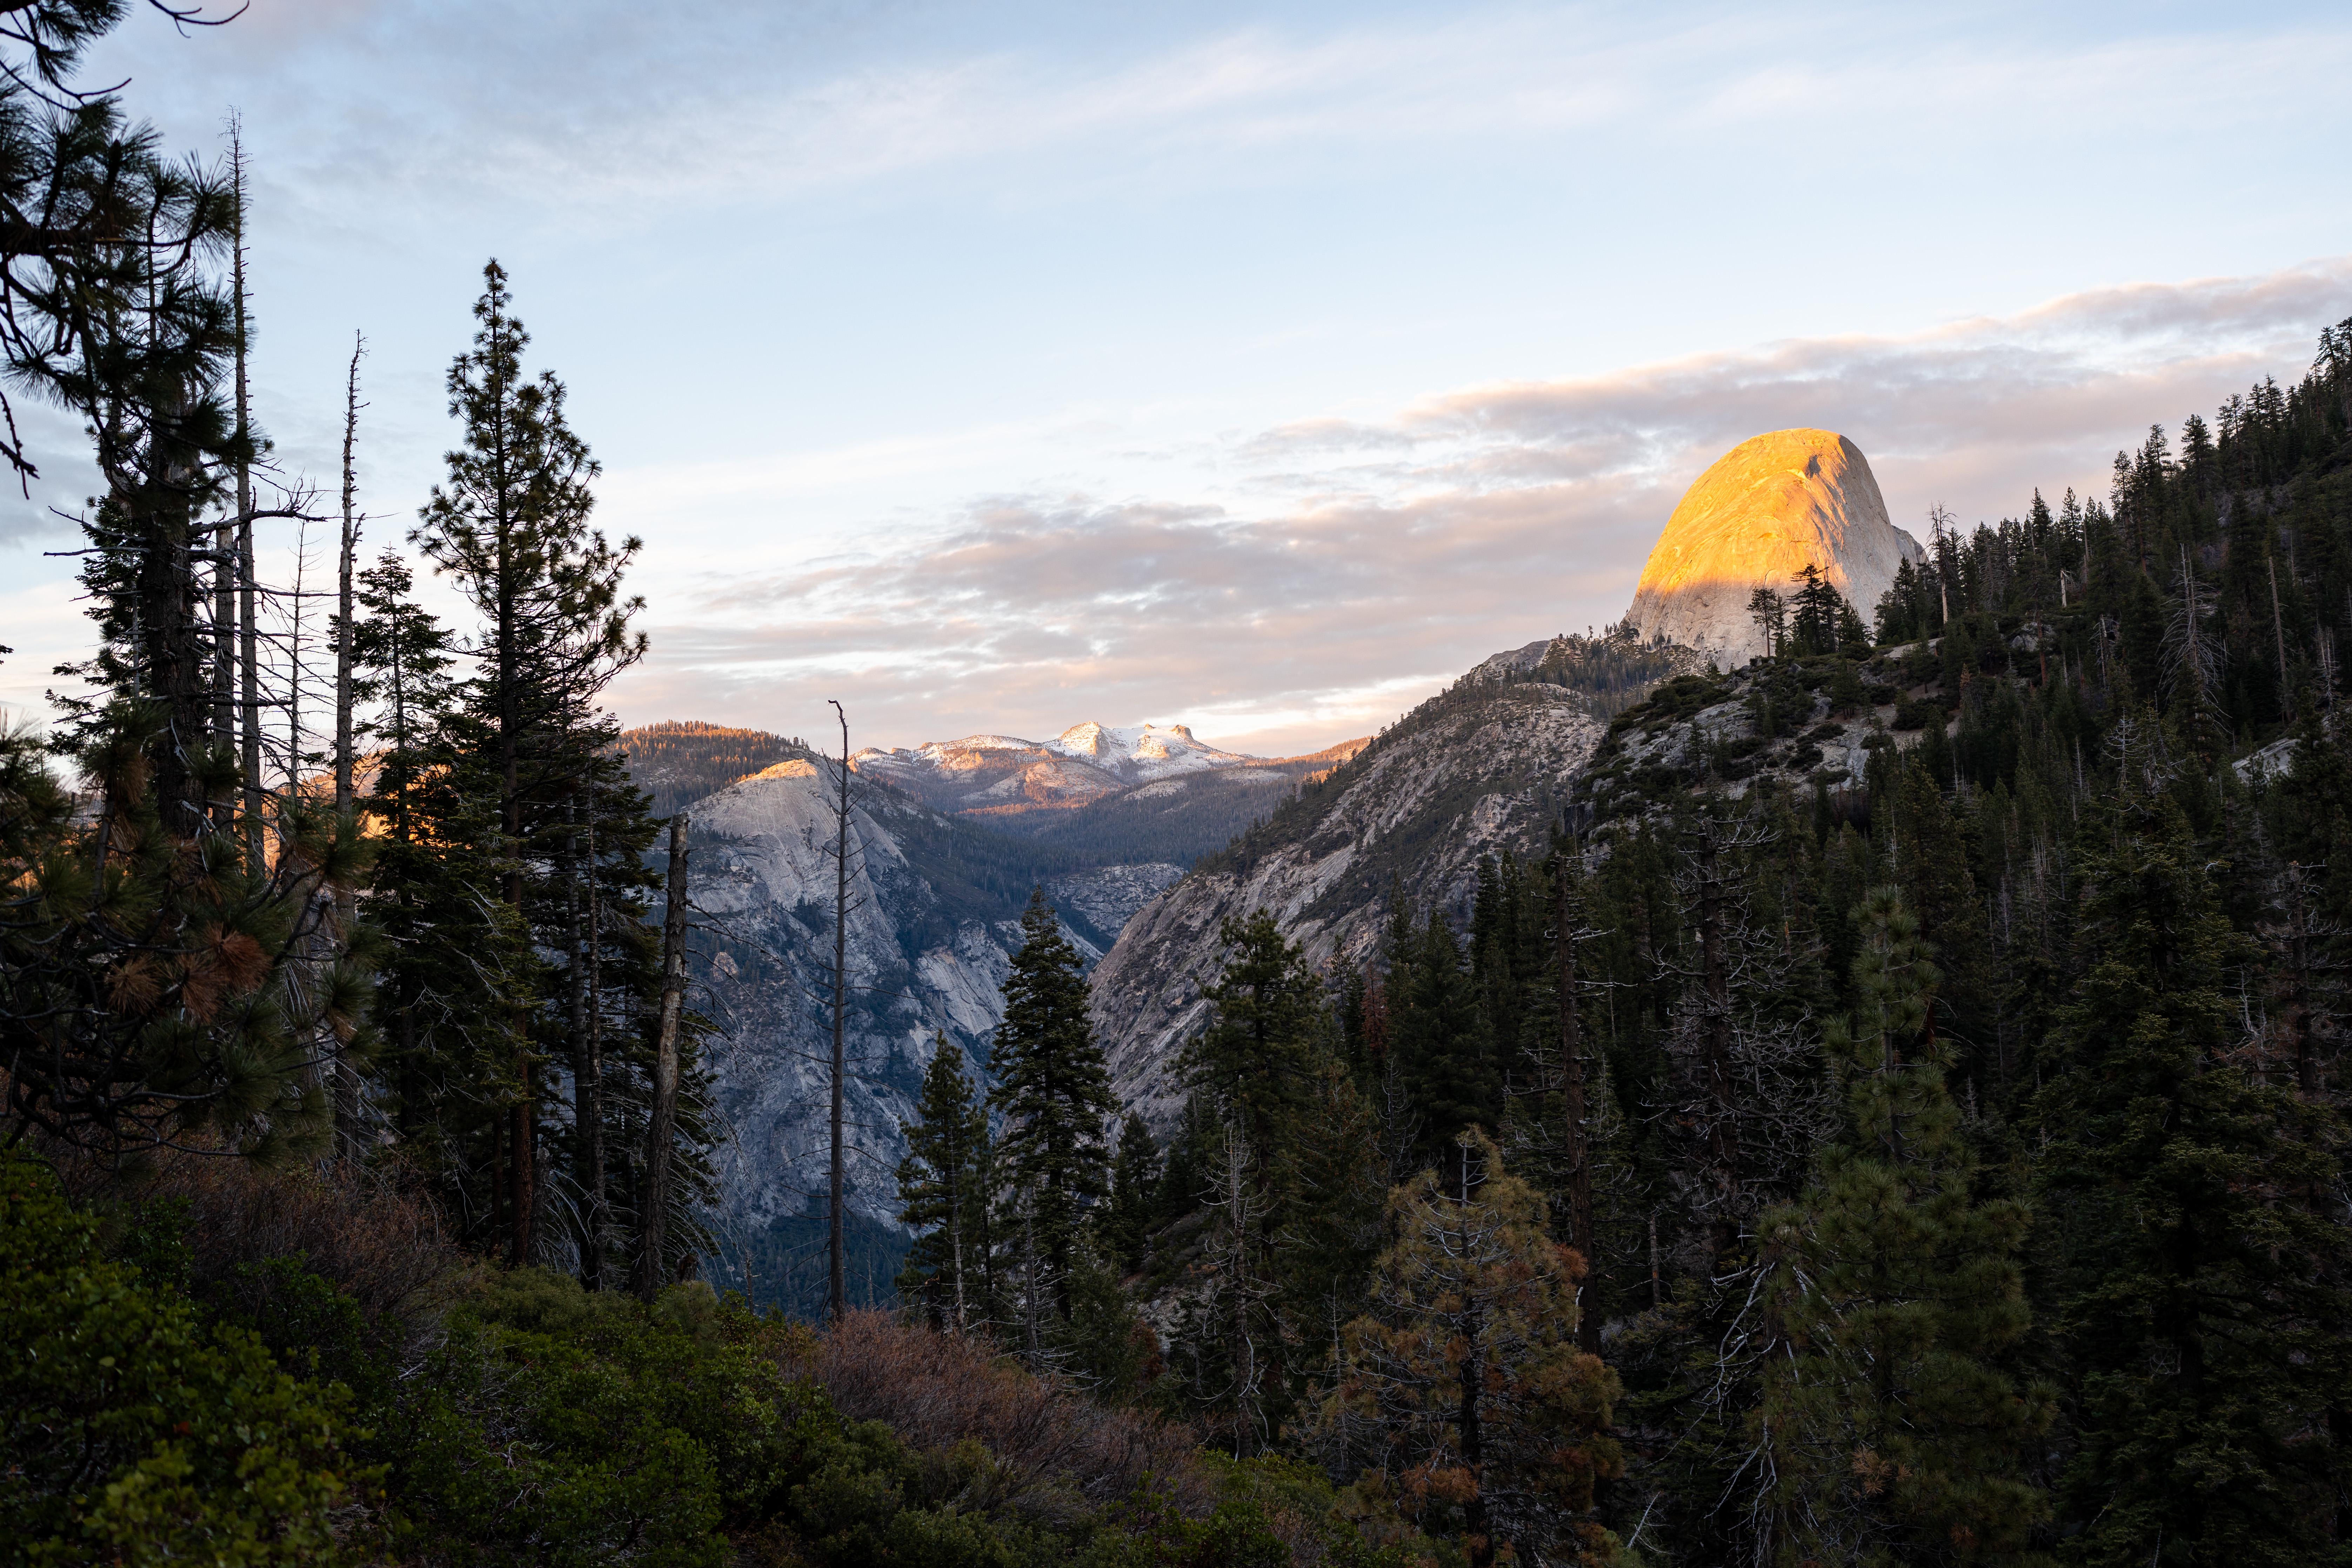 General 6704x4469 forest cliff Yosemite National Park USA nature landscape valley winter sunset clouds mountains